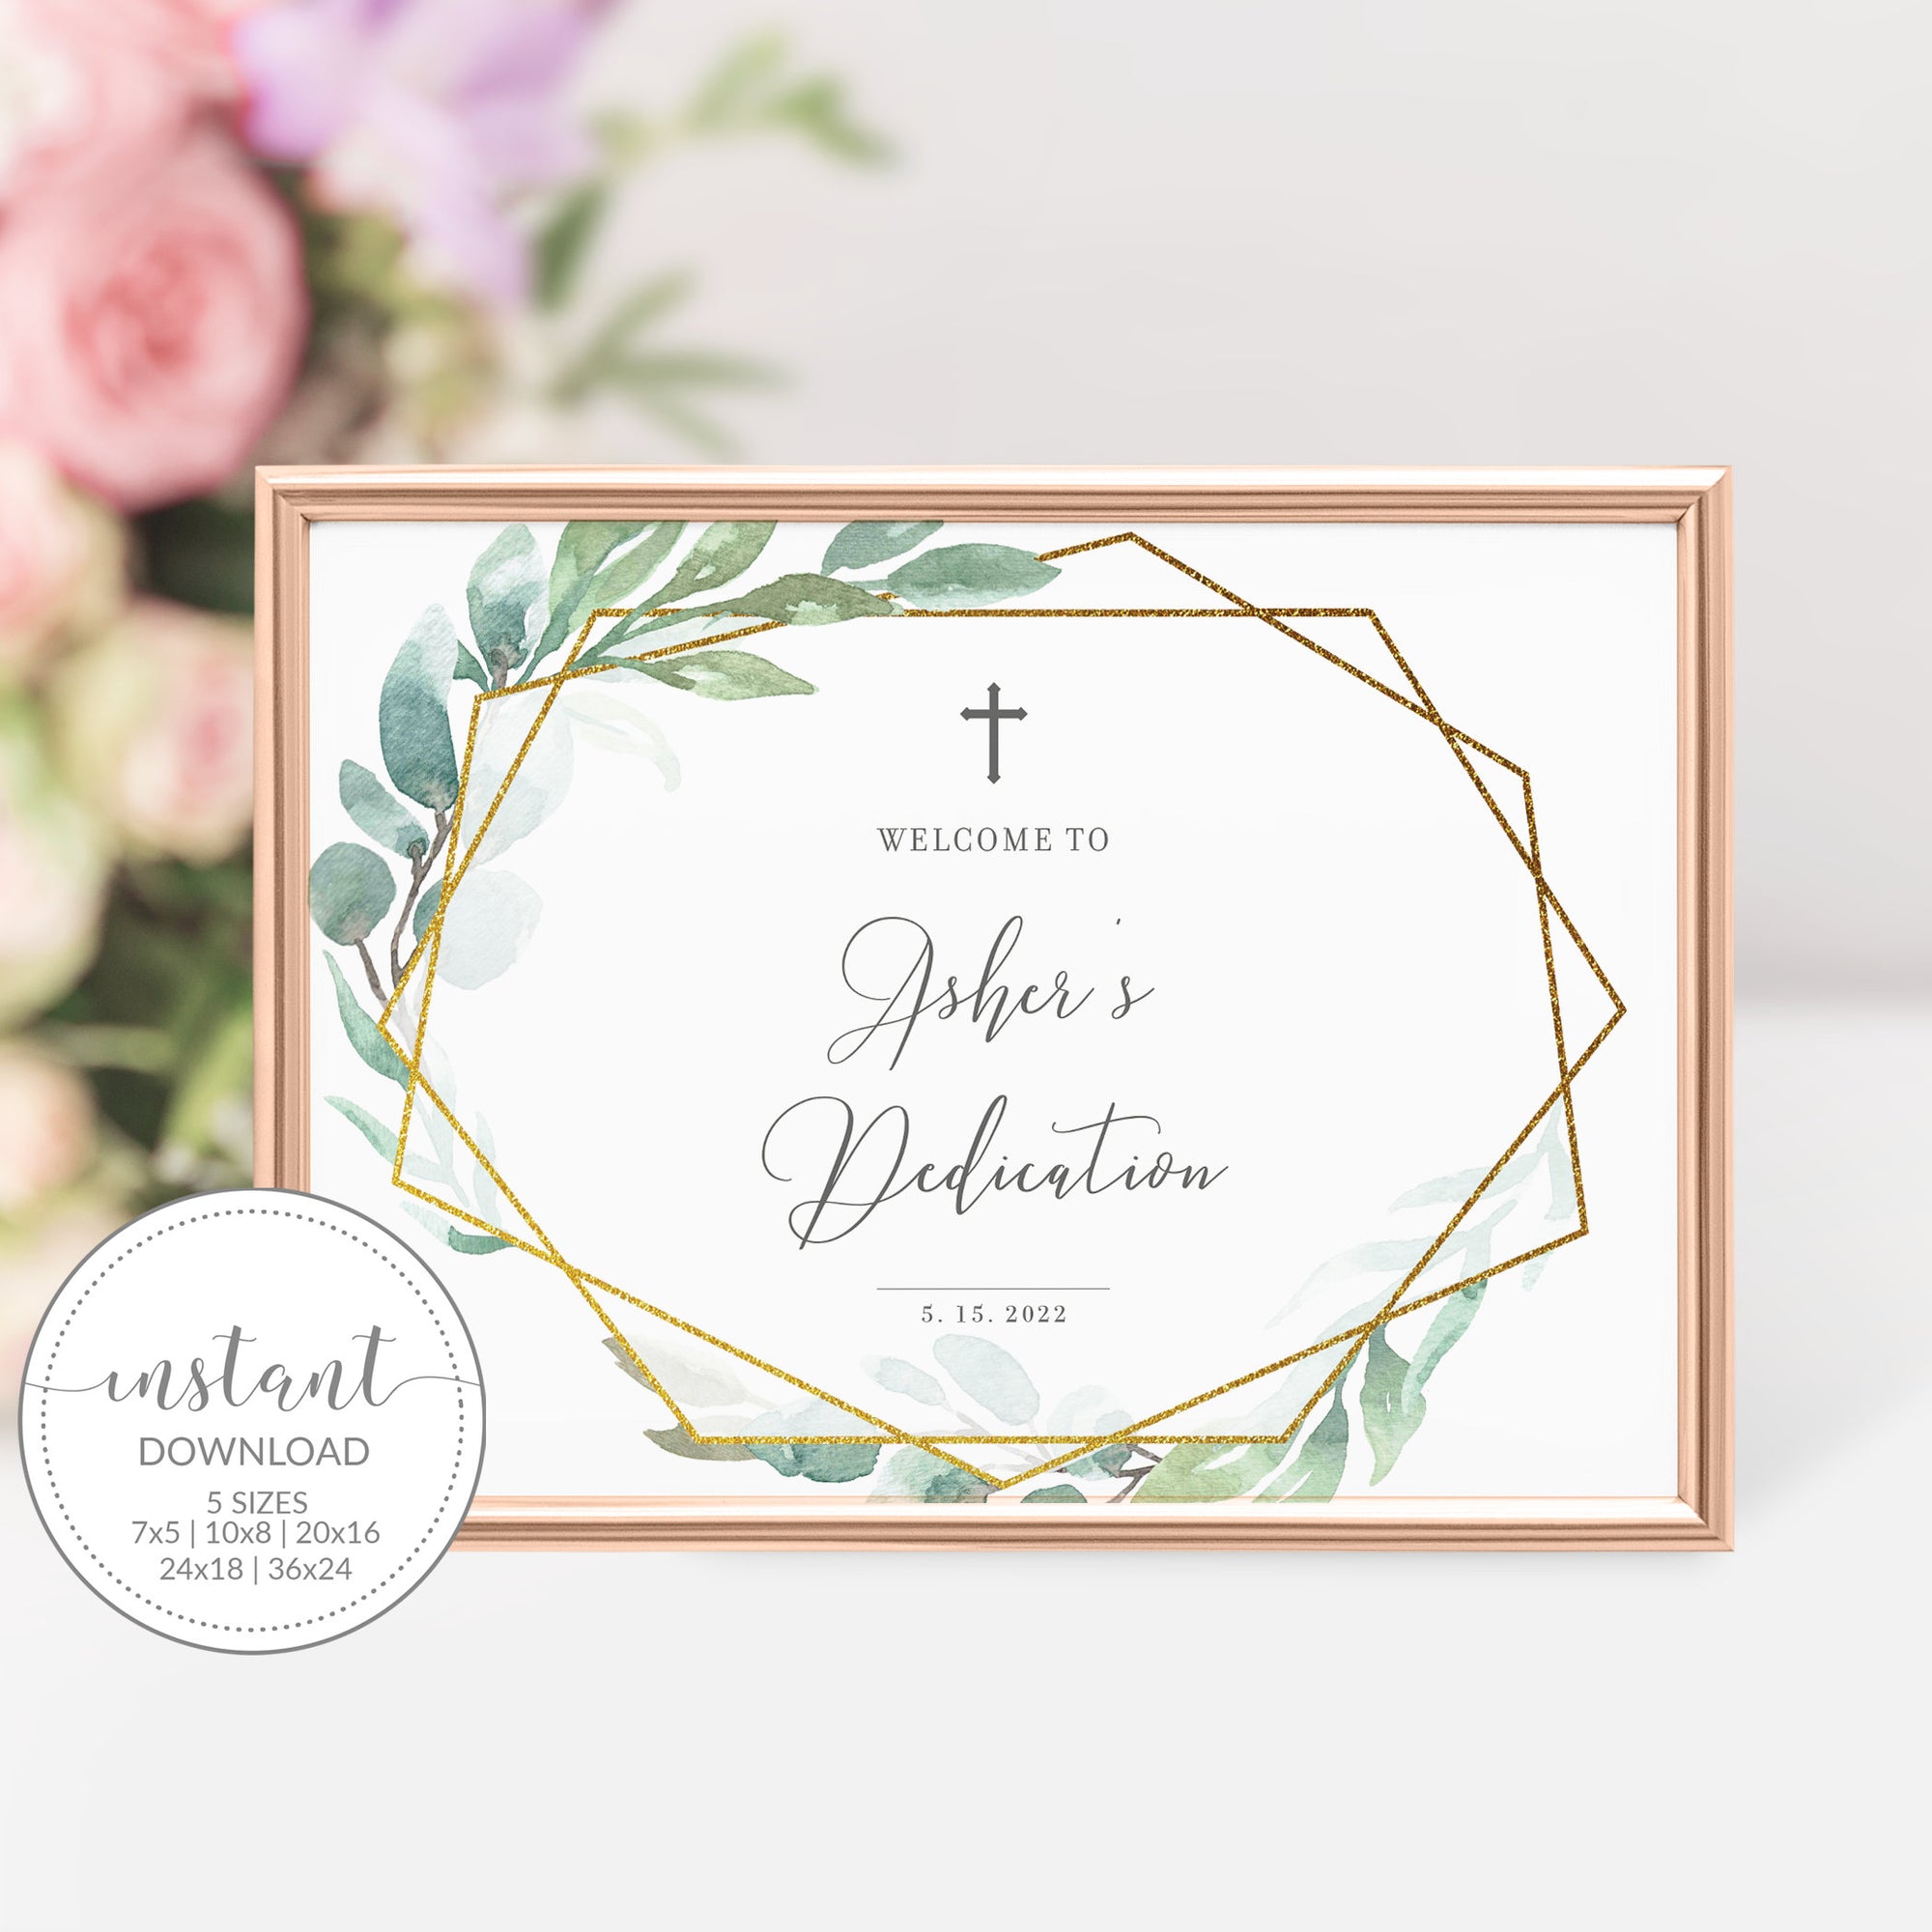 Baby Dedication Welcome Sign Template, Large Welcome Sign Printable, Boy Dedication Decorations, Geometric Greenery, INSTANT DOWNLOAD GFG100